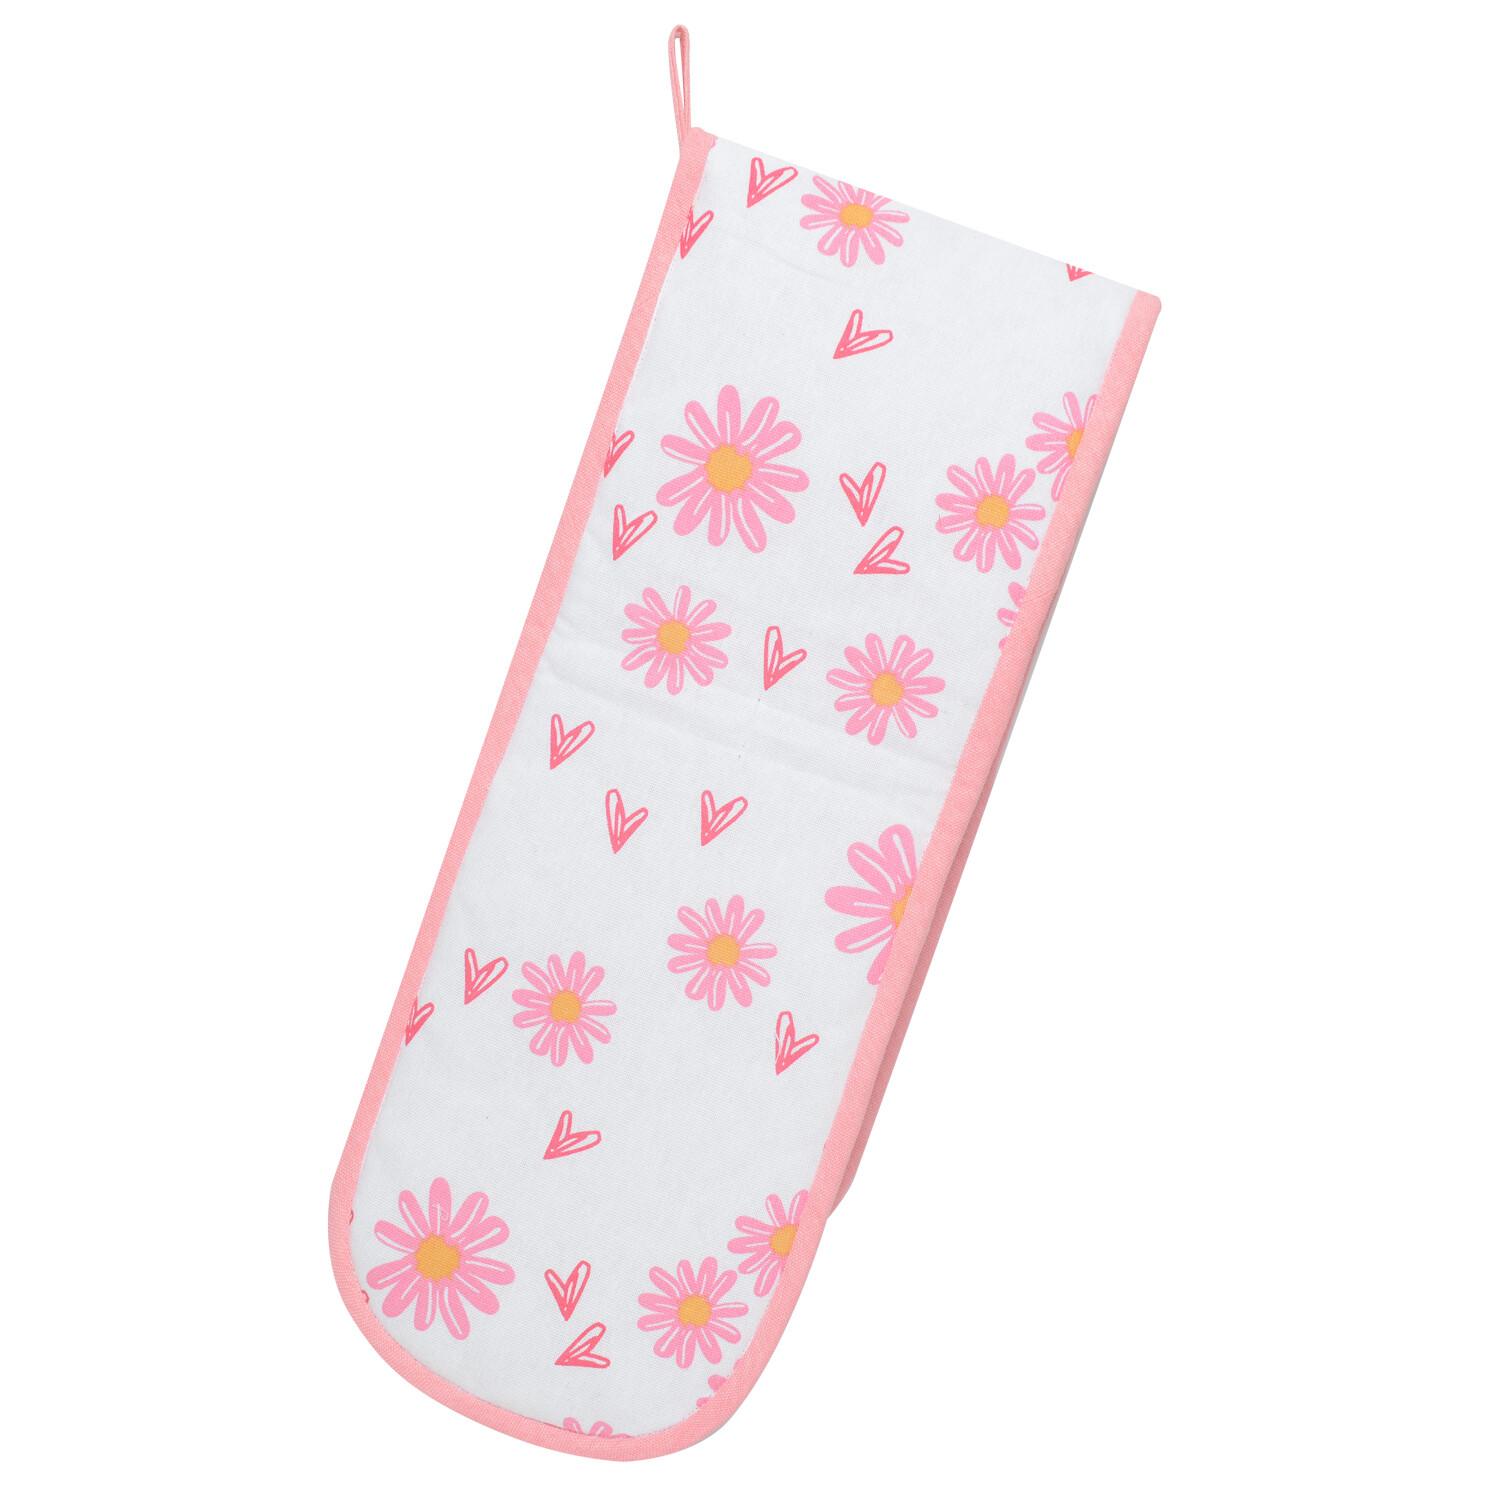 Daisy Daze Double Oven Gloves - Pink Image 2